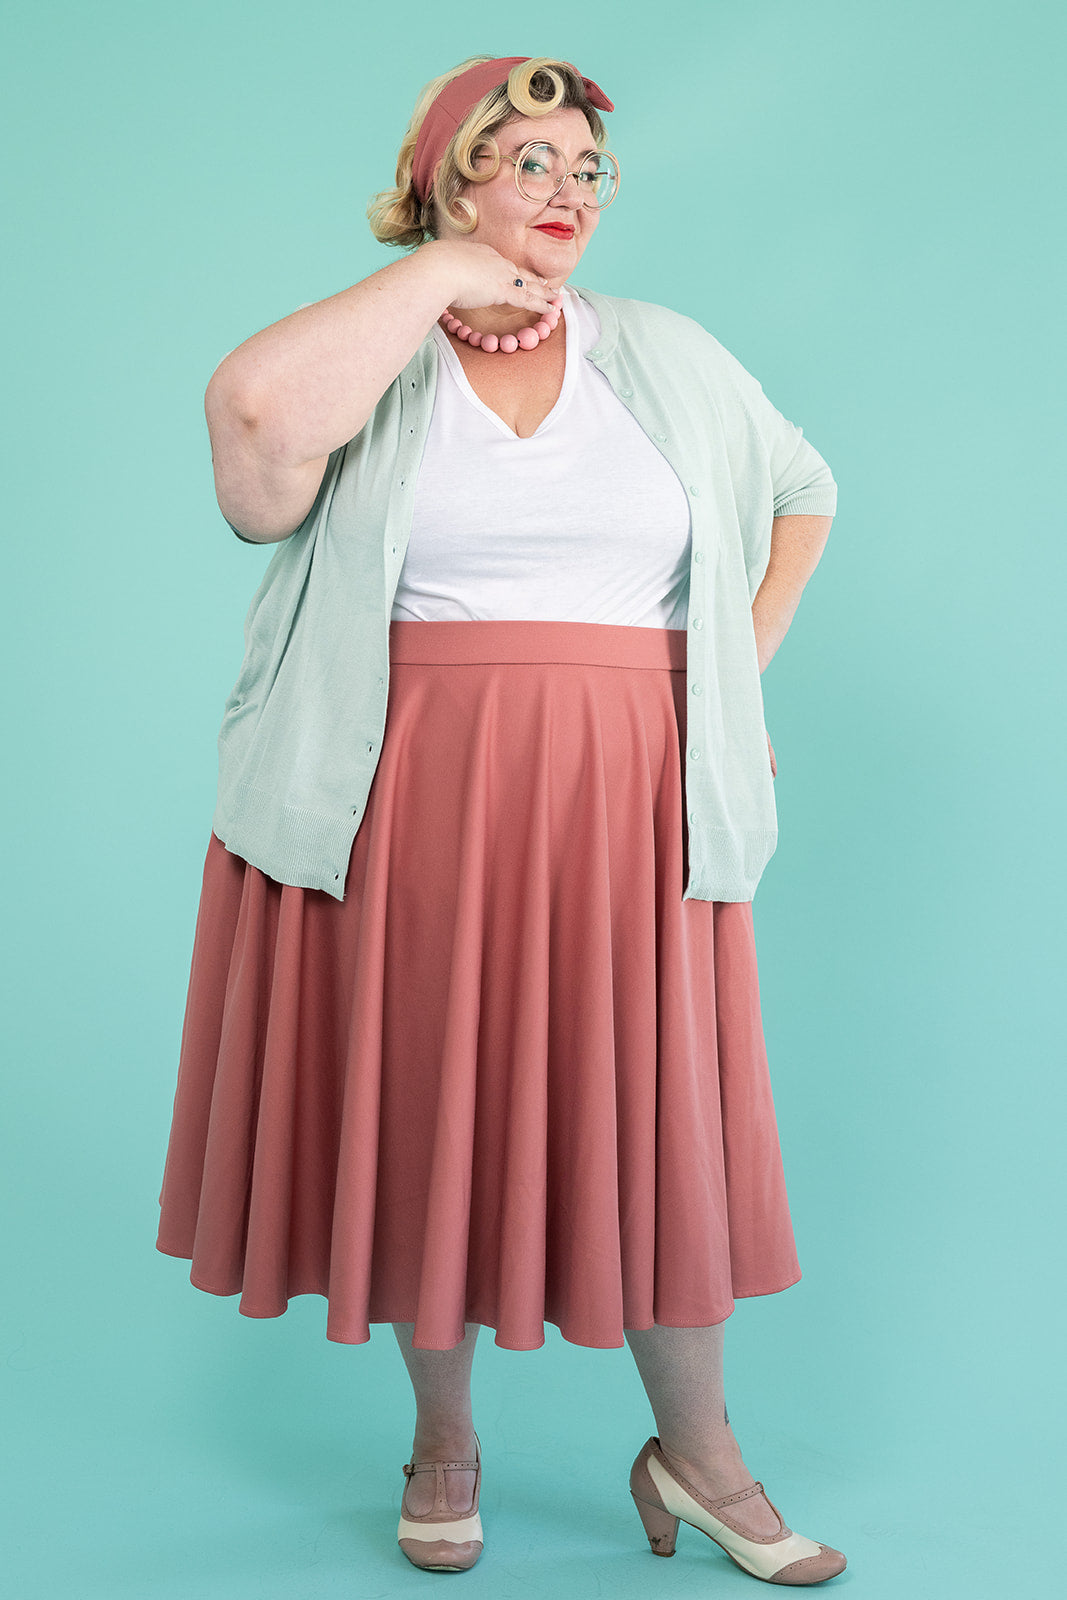 A plus-size blonde woman is looking at the camera and playfully smiling. She is wearing a light blue cardigan, a white tshirt and a pink skirt